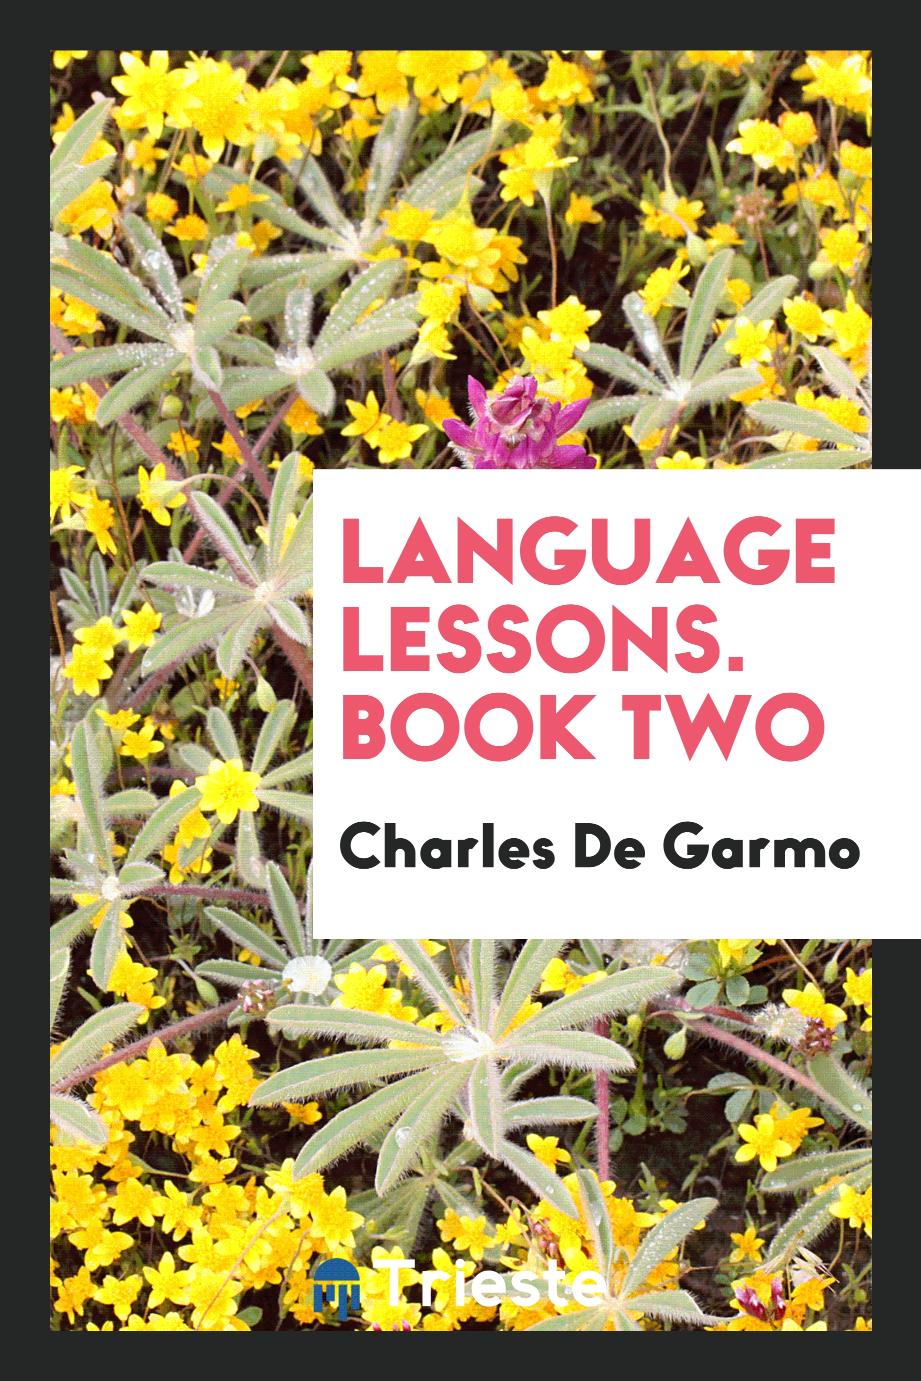 Language lessons. Book two